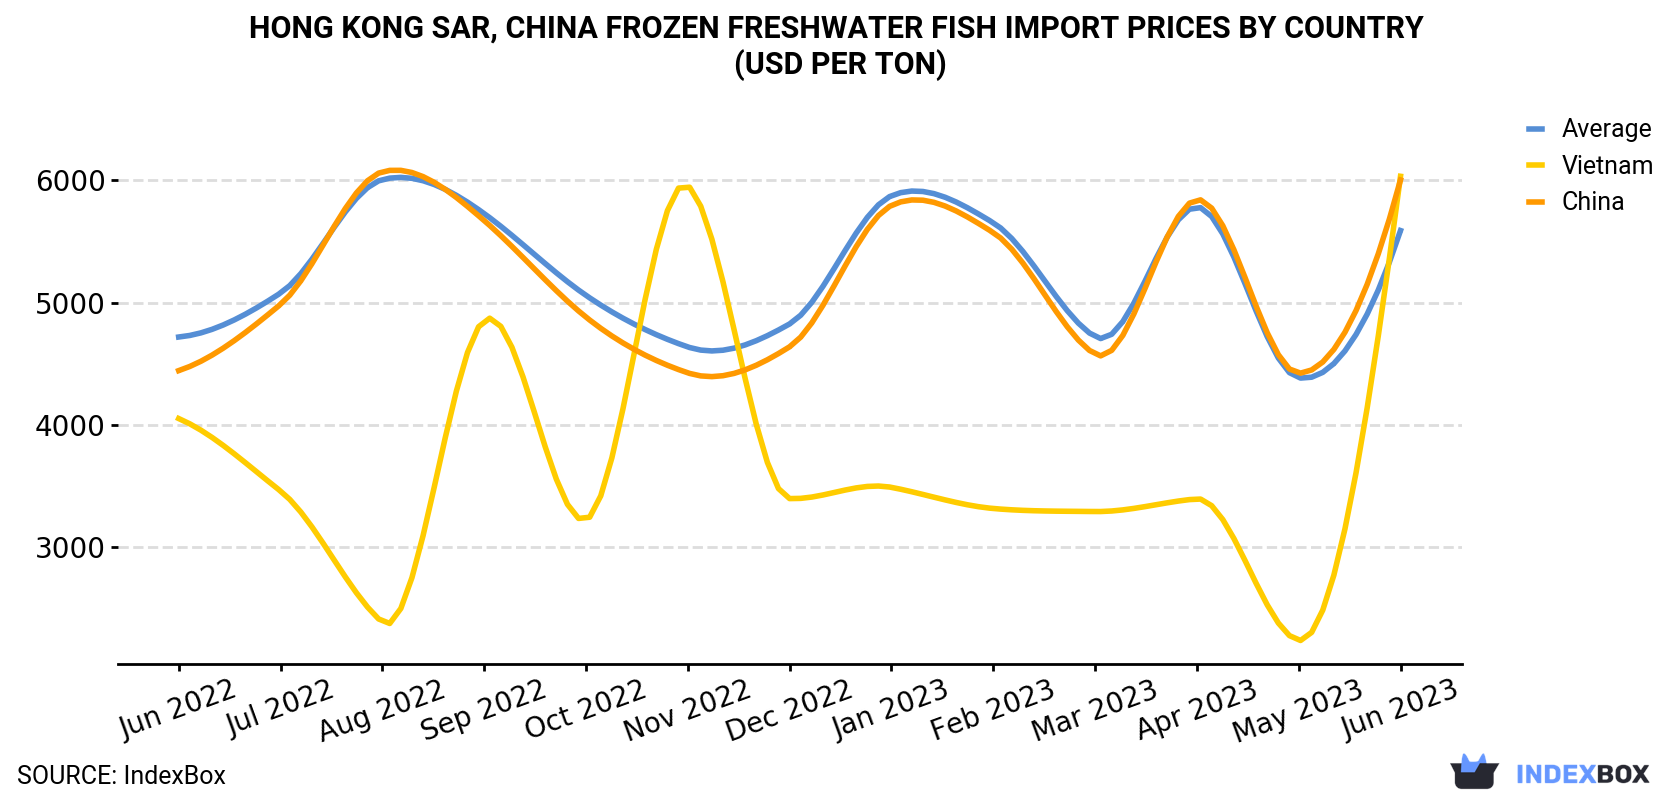 Hong Kong Frozen Freshwater Fish Import Prices By Country (USD Per Ton)